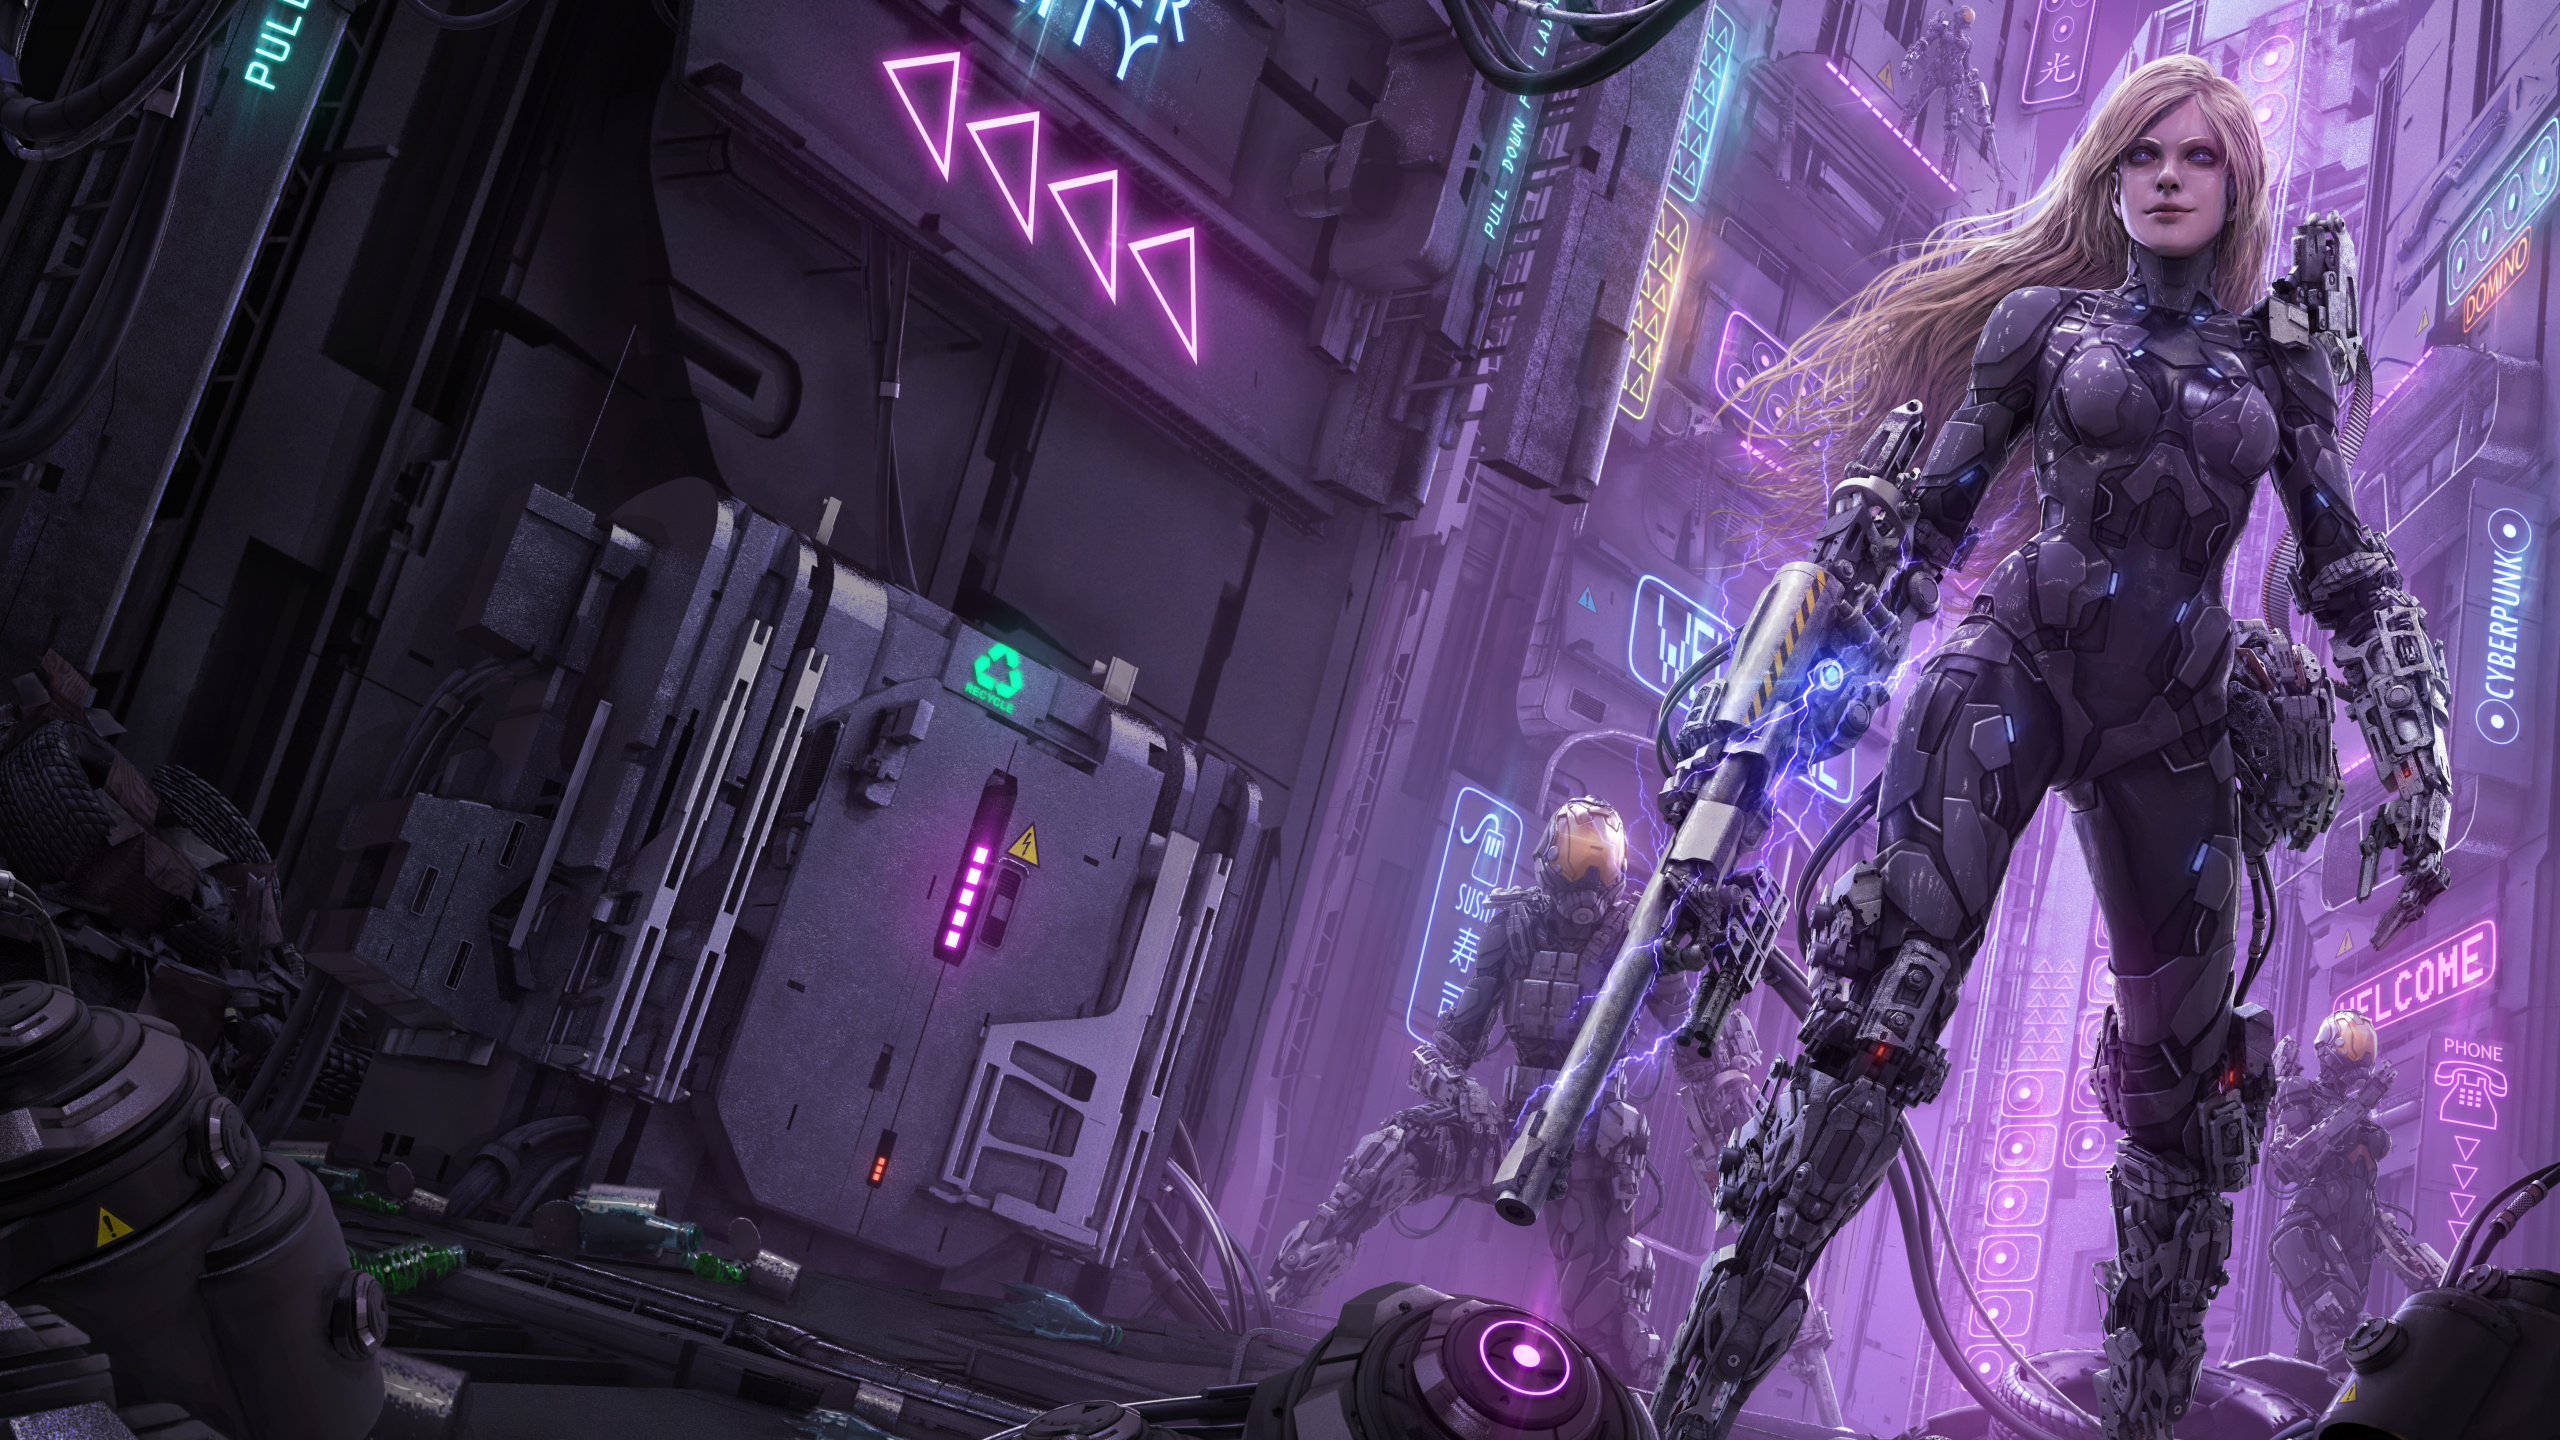 Cyberpunk, Science Fiction, Purple, pc Game, Games. Wallpaper in 2560x1440 Resolution